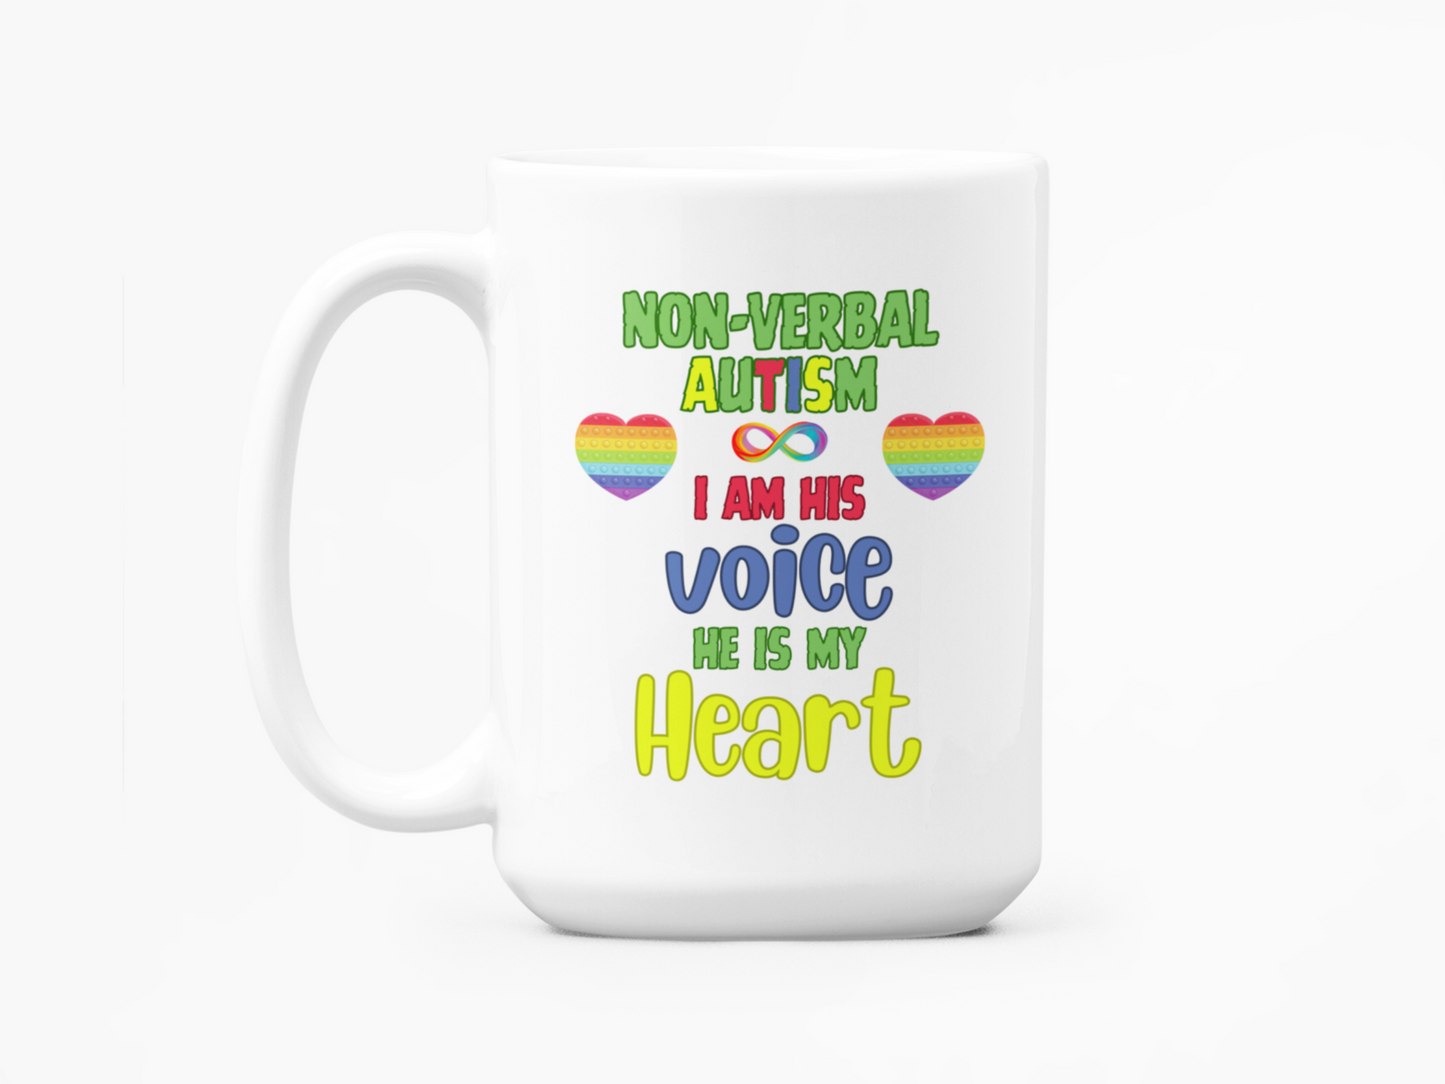 Non-verbal Autism I am his voice he is my heart coffee mug